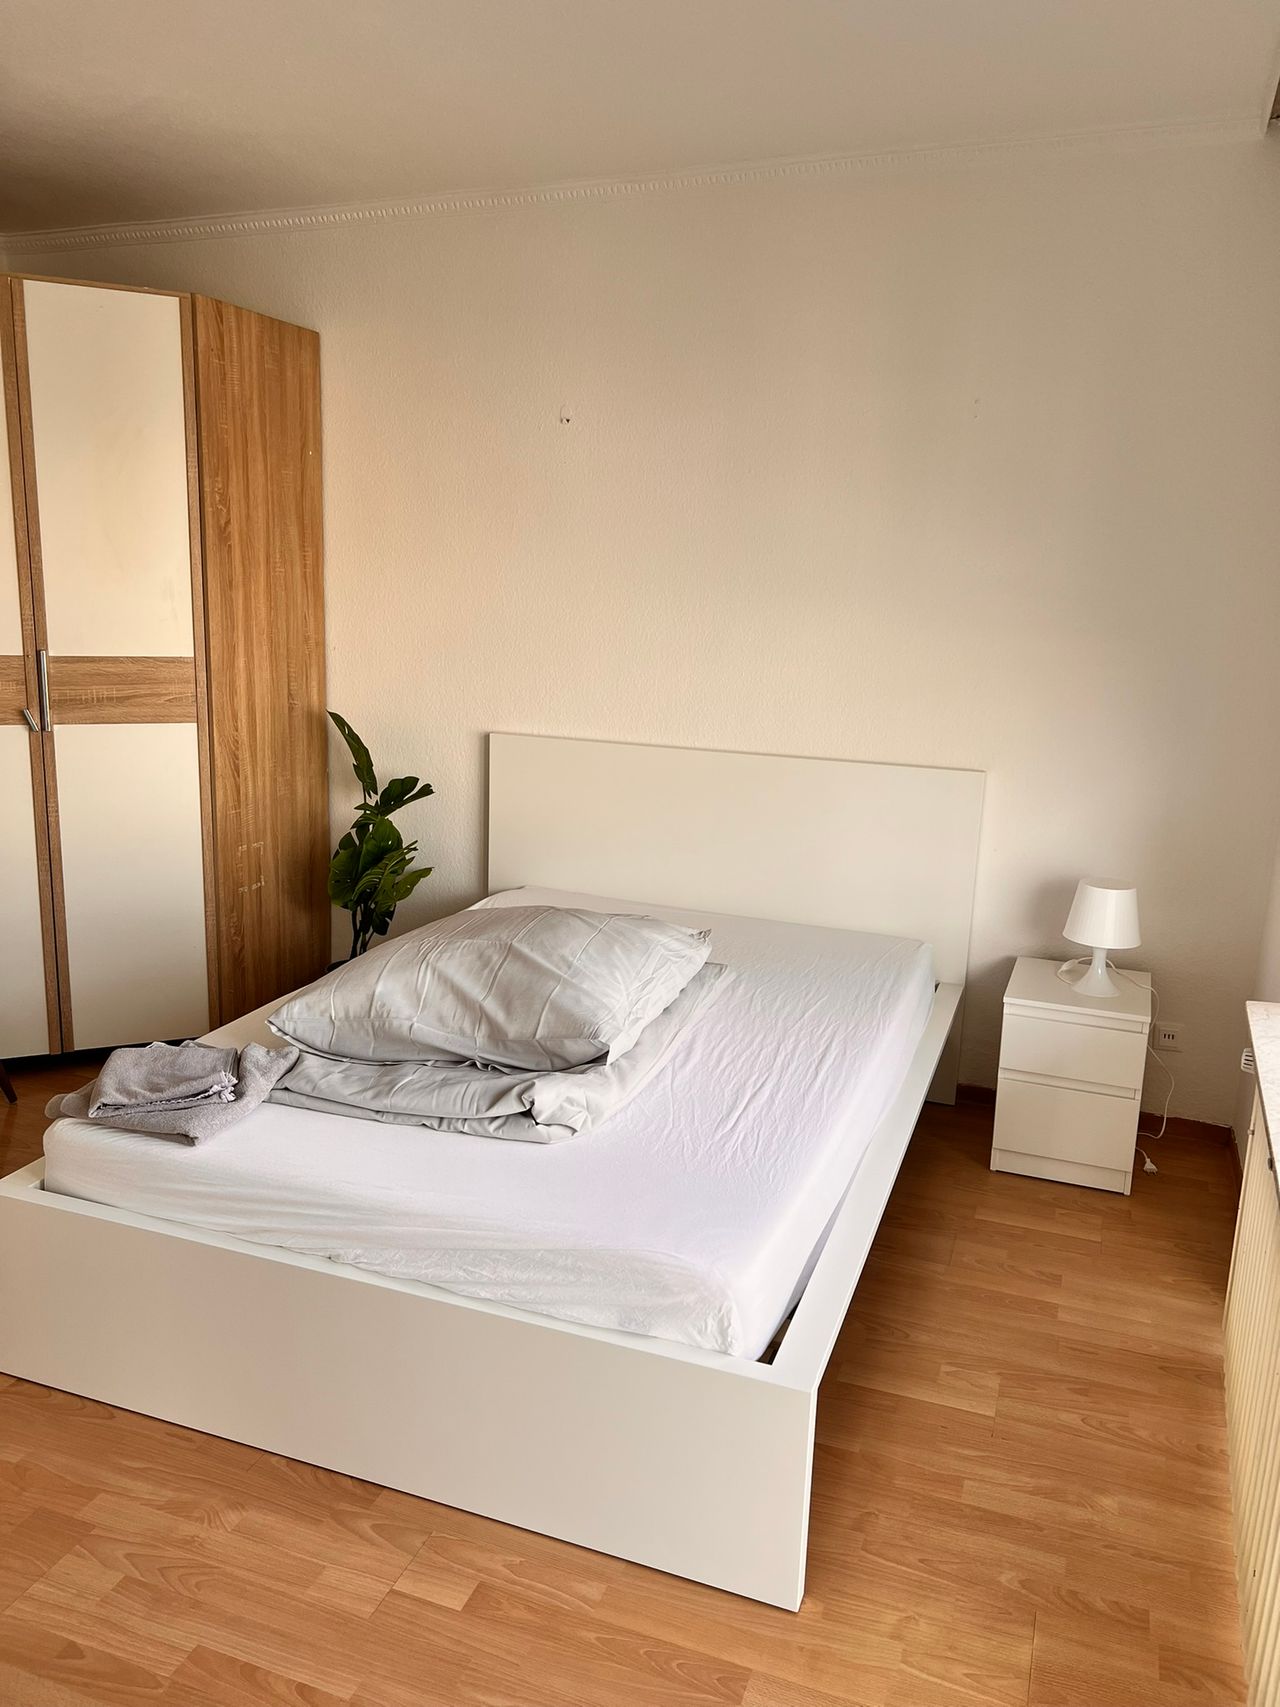 Comfortable 2 bedroom penthouse in the heart of Frankfurt am Main